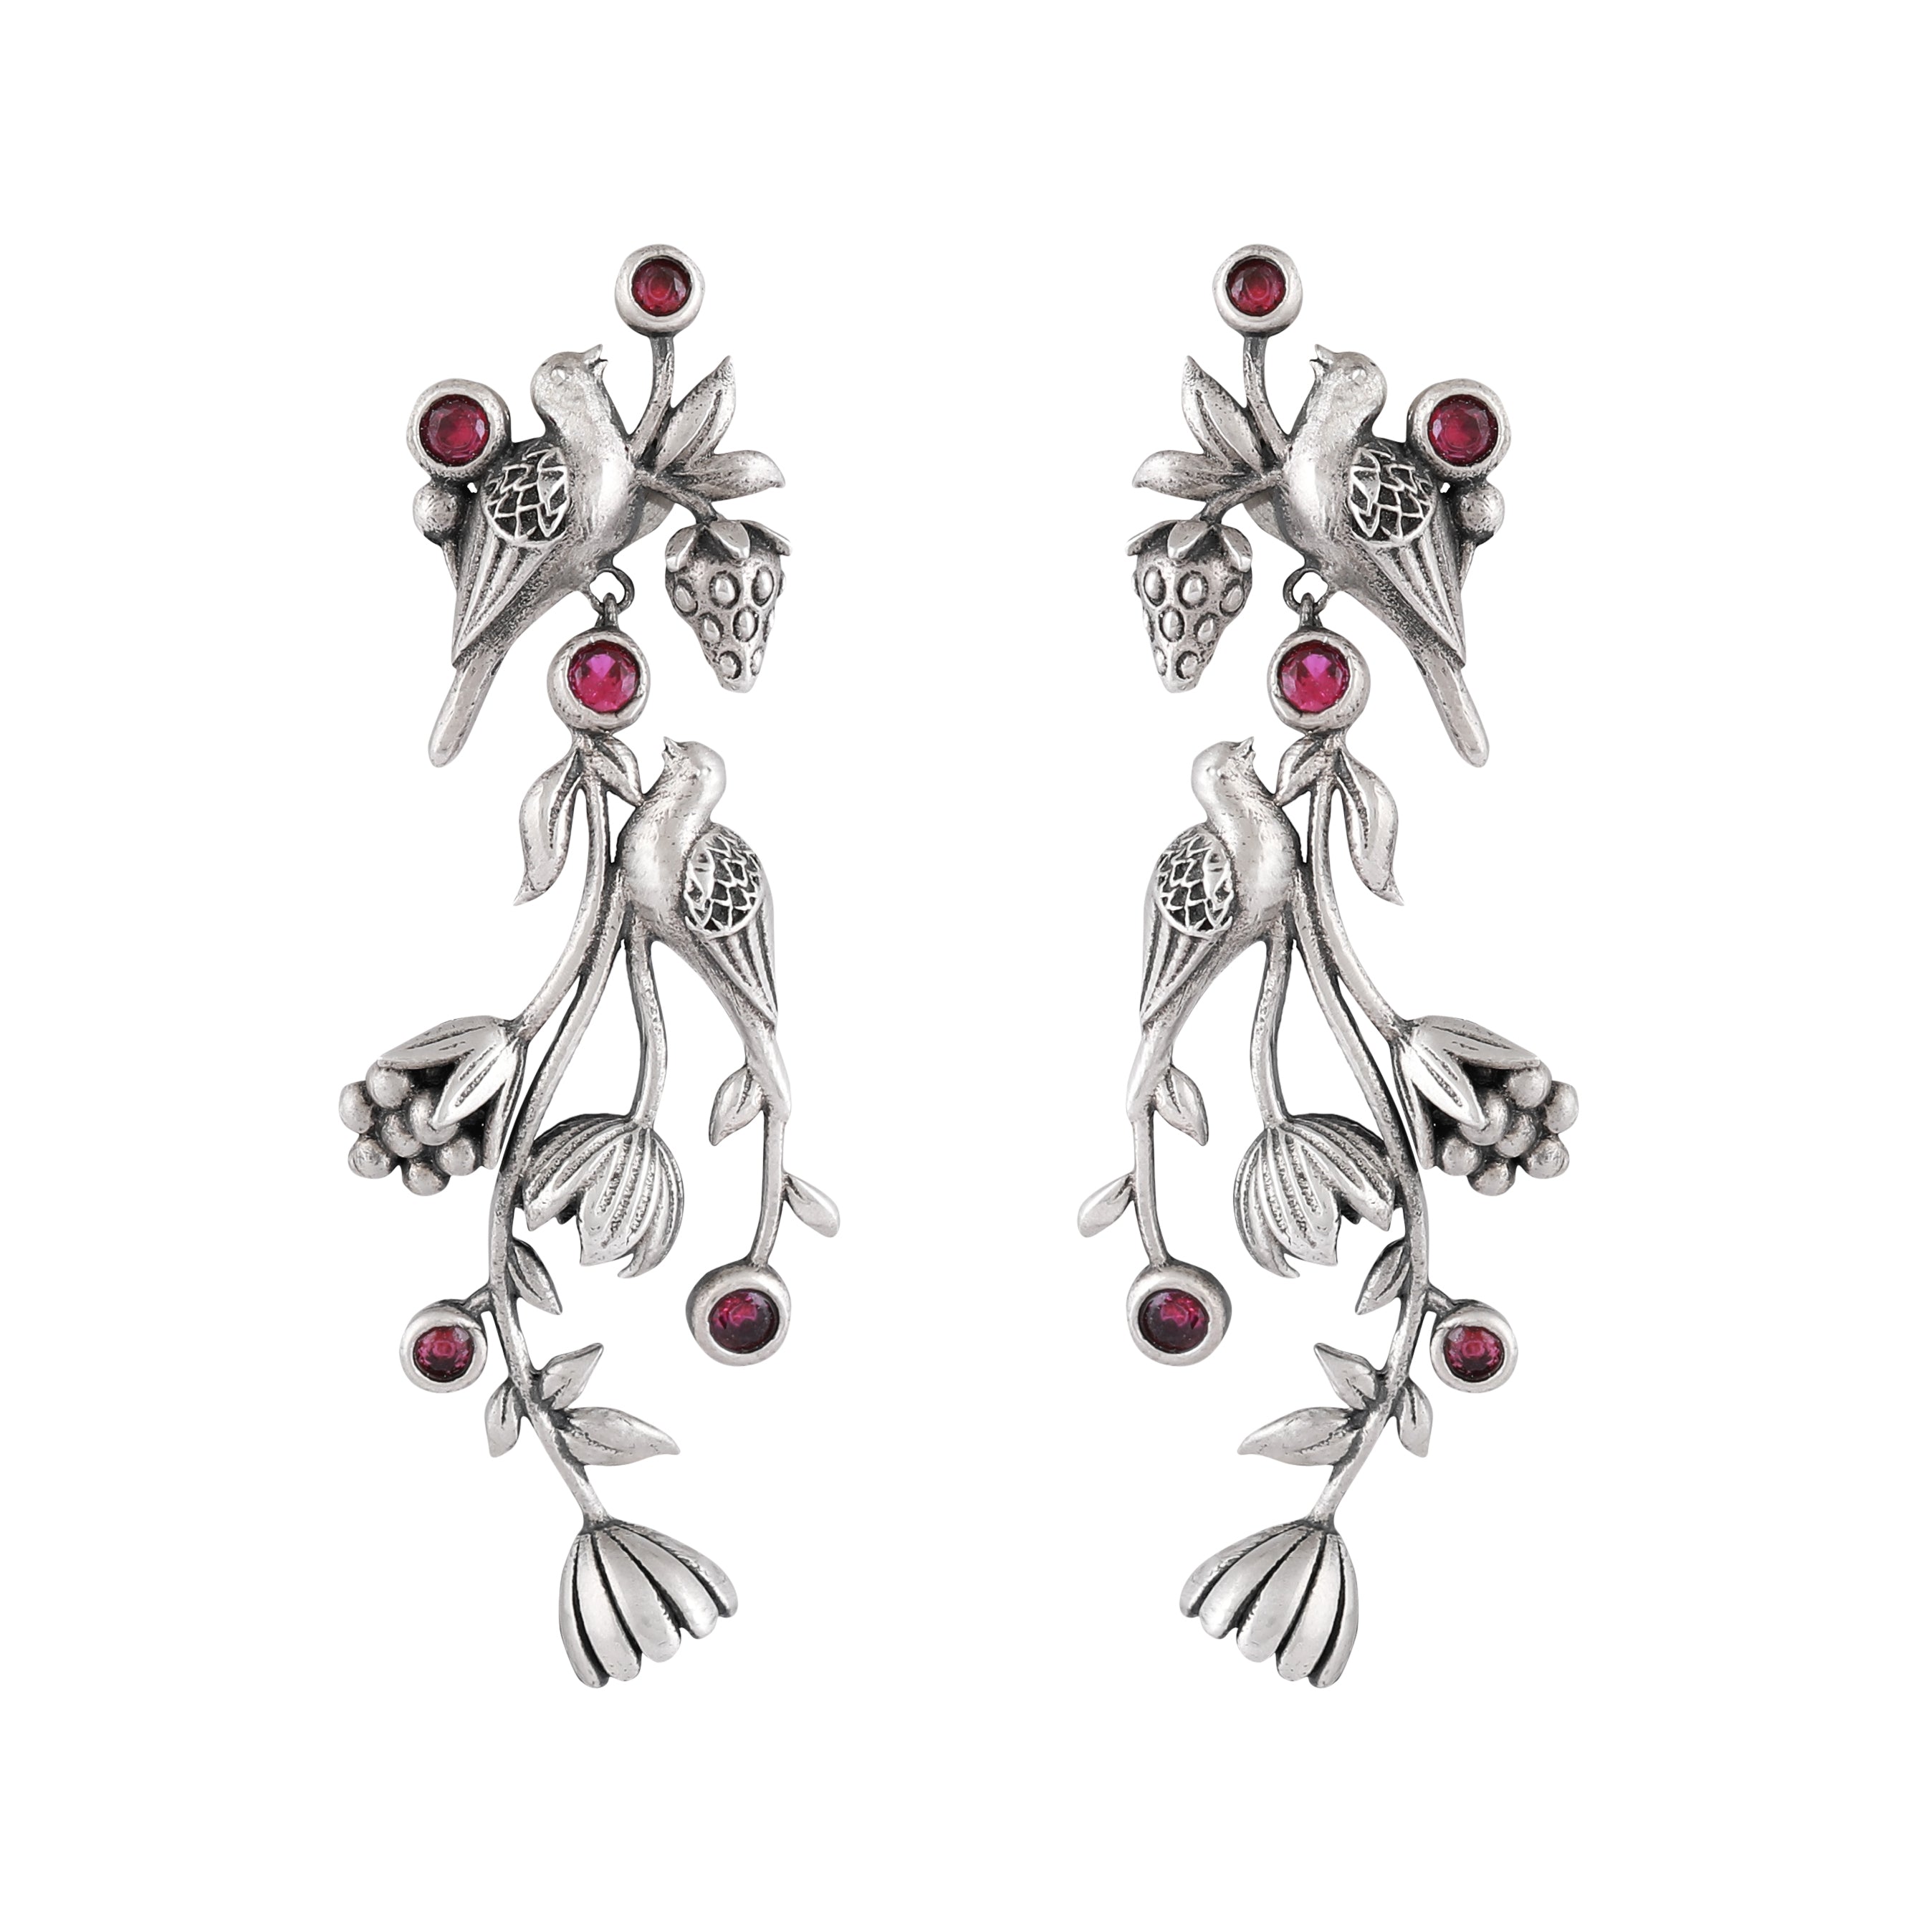 William Morris - Strawberry Thief Dangling Partners Silver Earrings by Moha